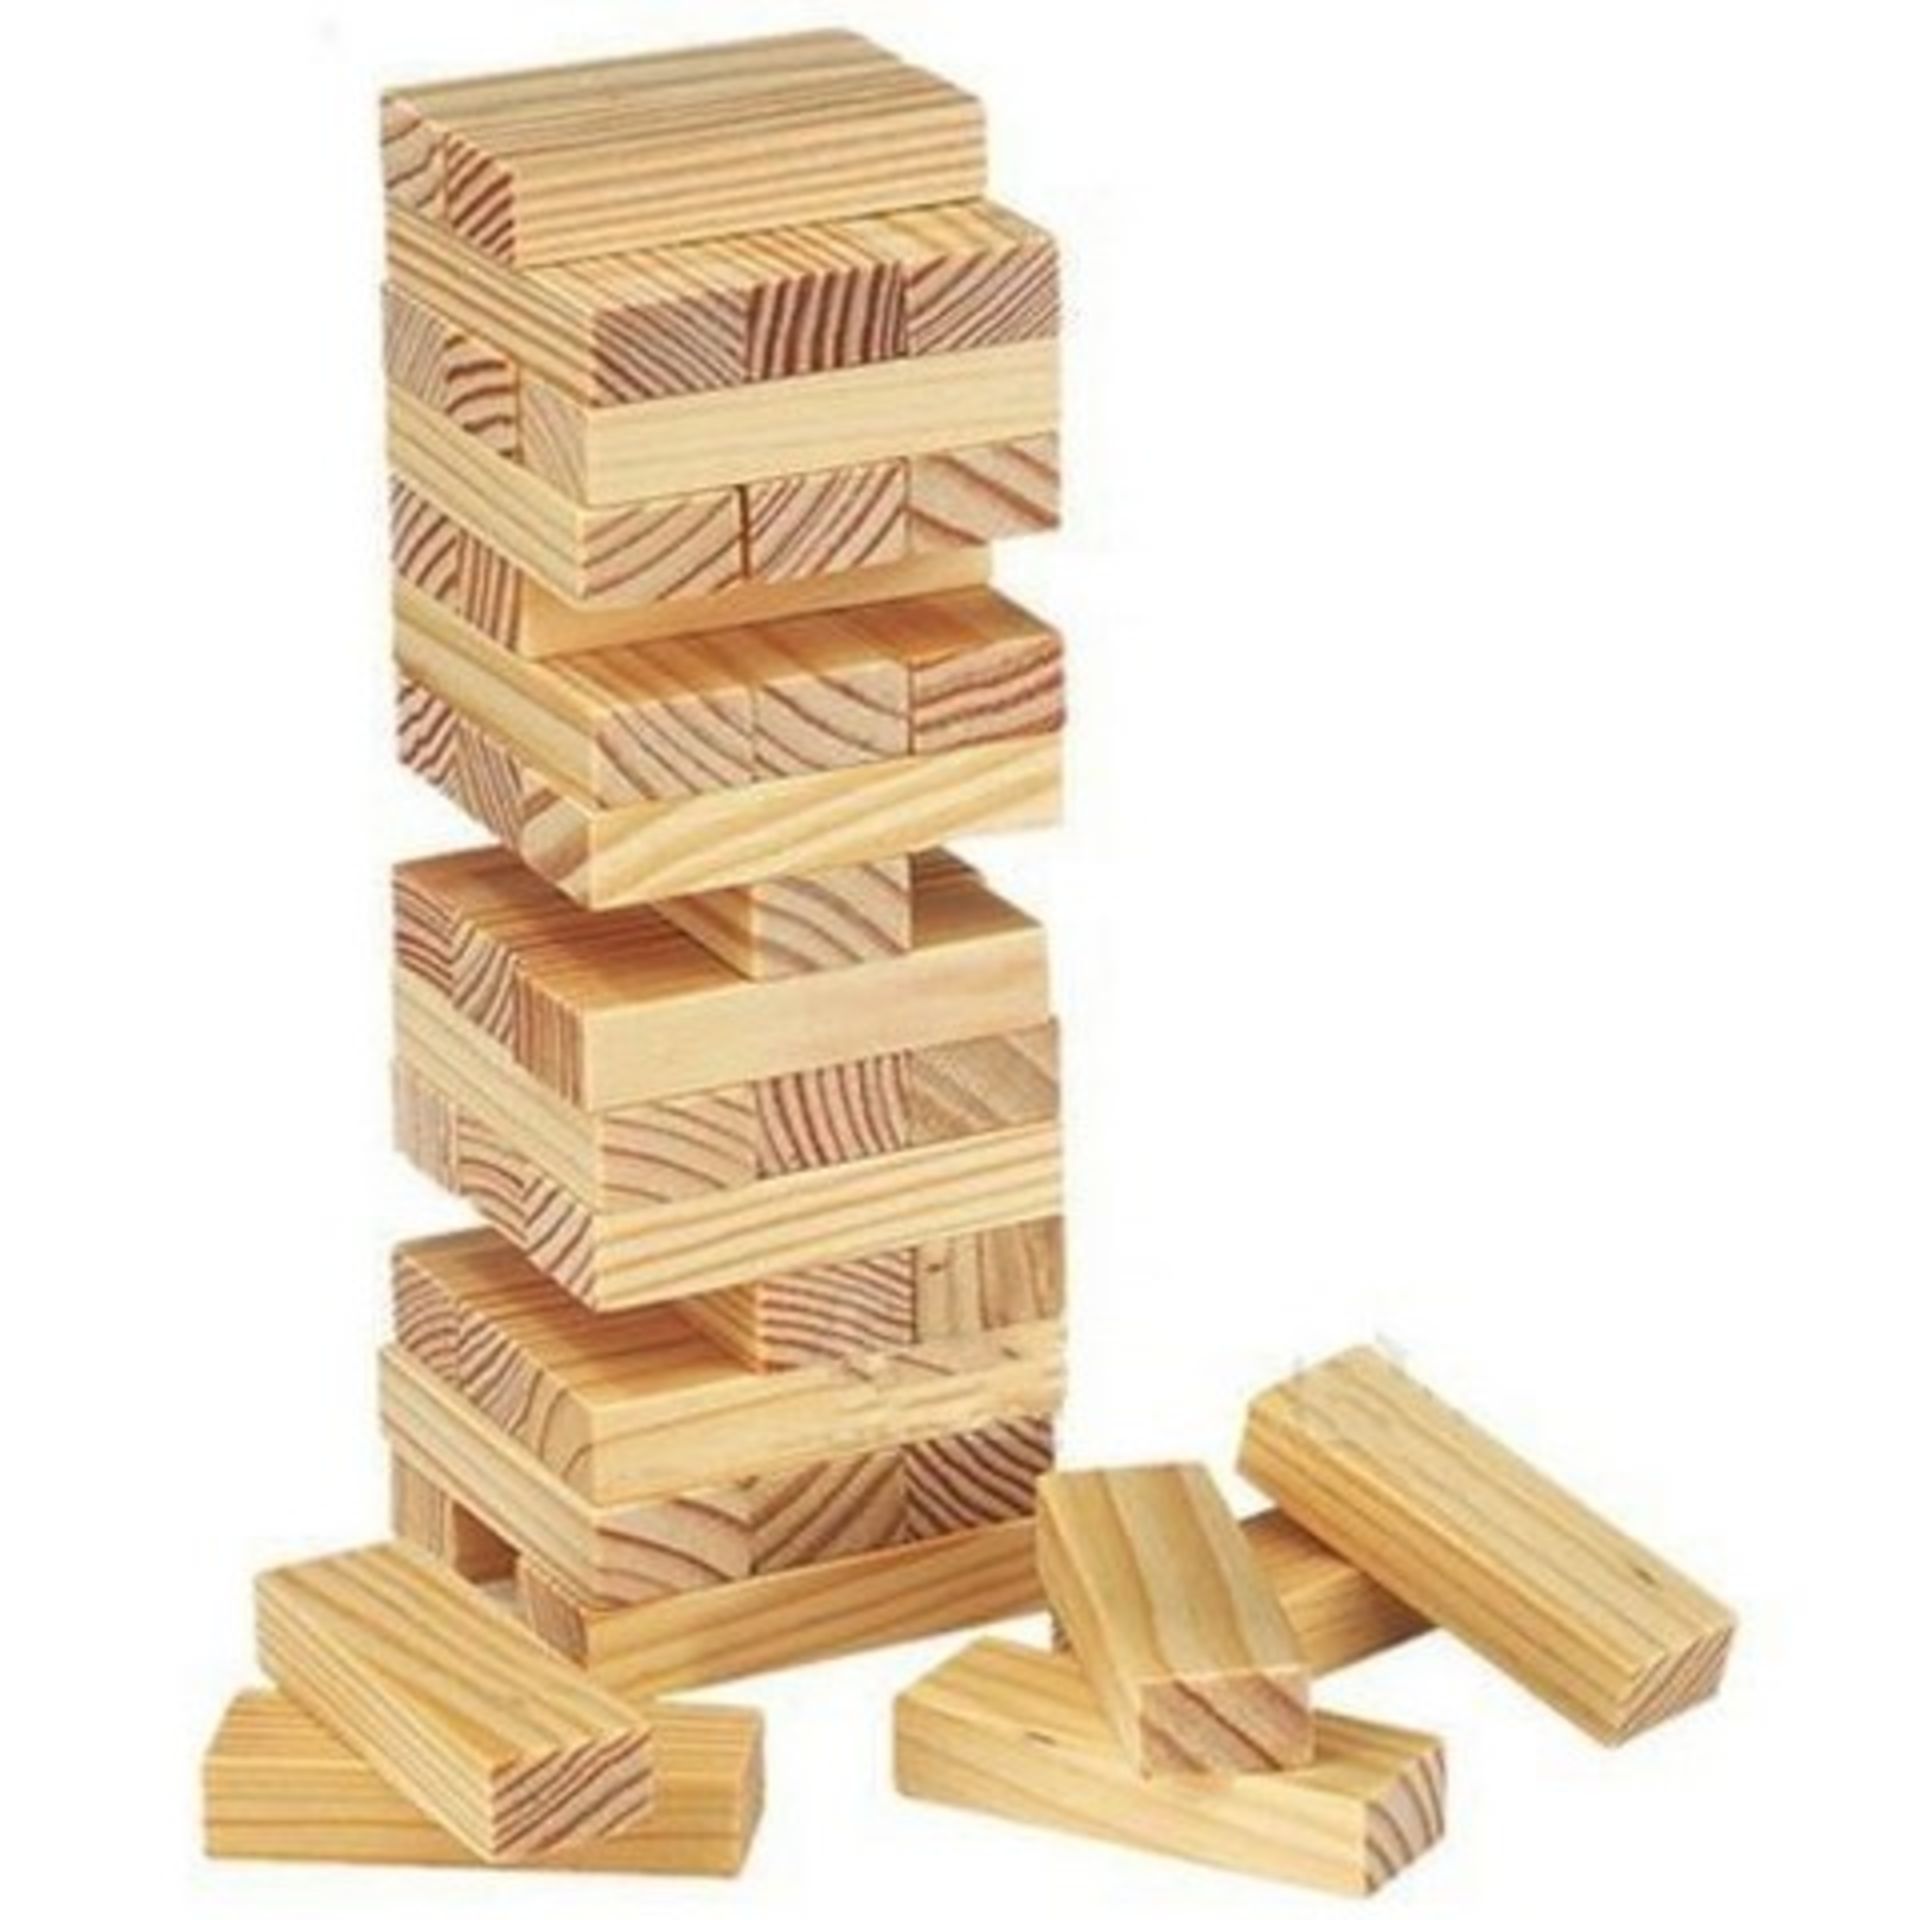 V Brand New Quality Wooden Tower Block Game